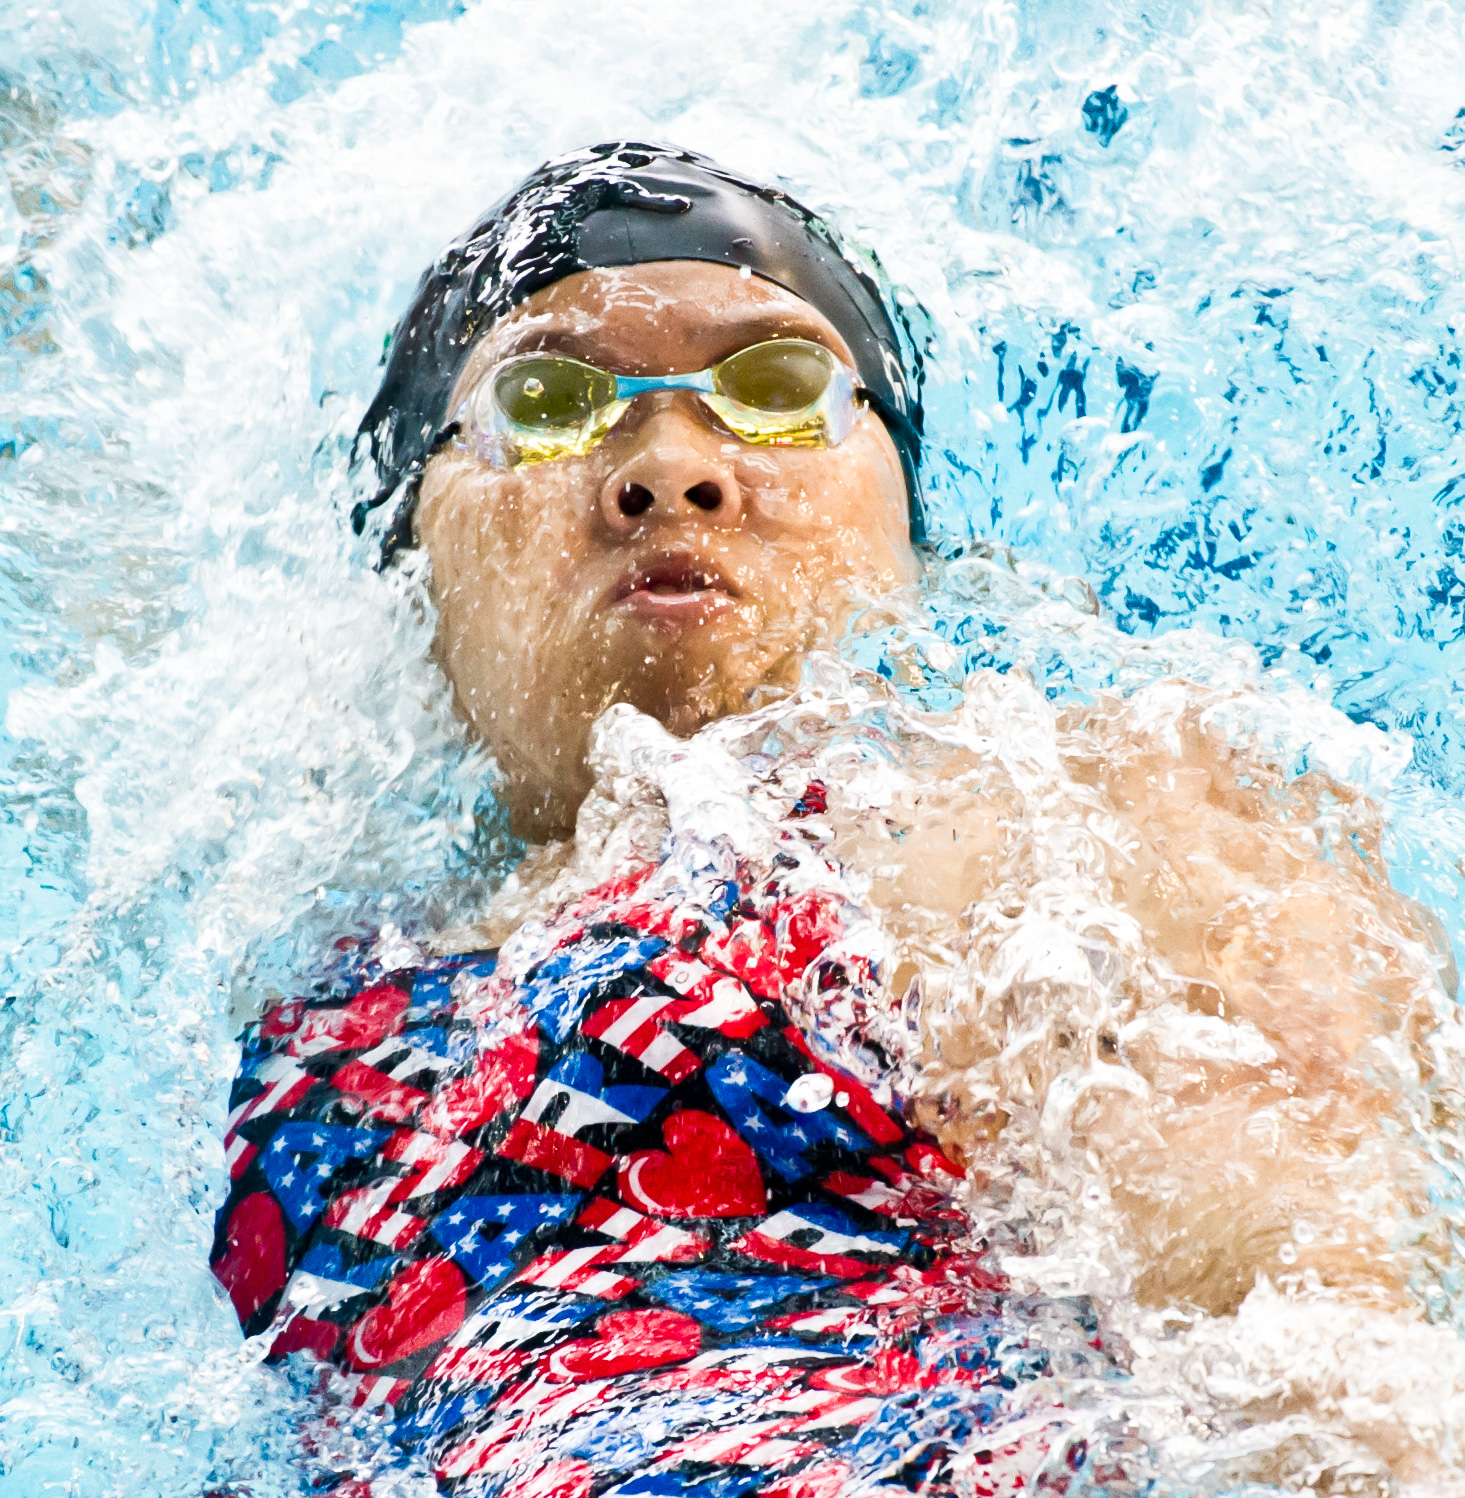 A swimmer in action during the IVP finals at the Singapore Sports School.